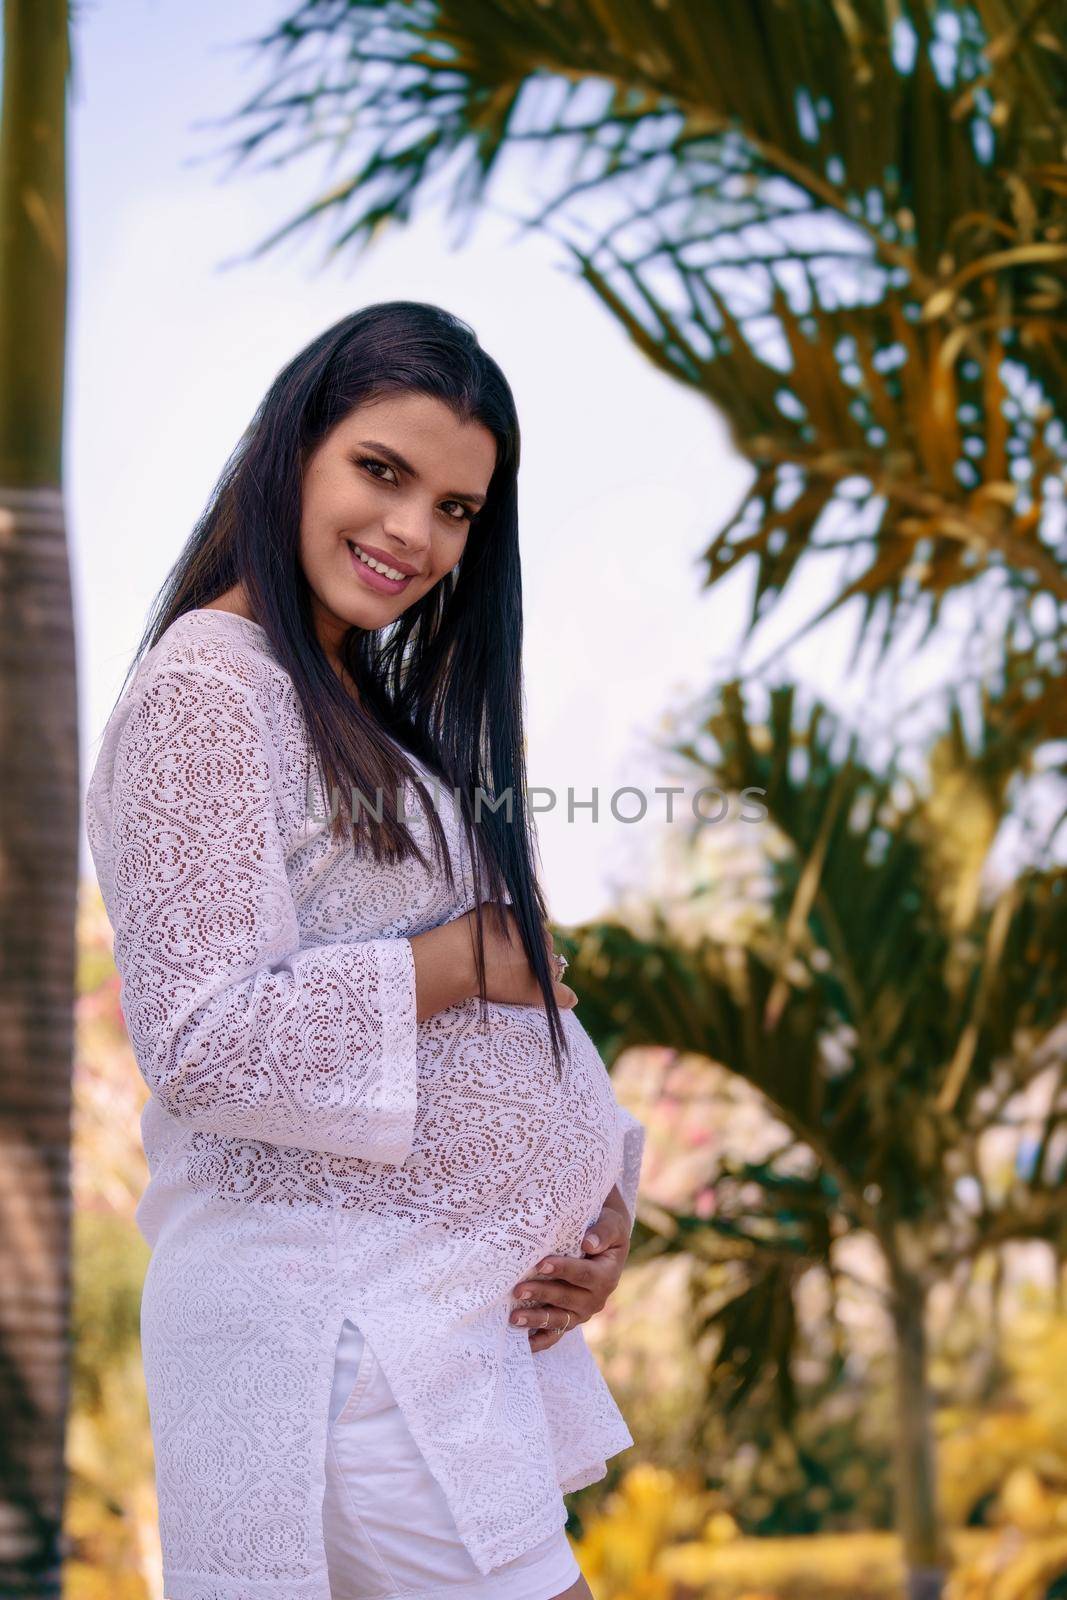 Outdoor photo of a pregnant young woman wearing white clothes